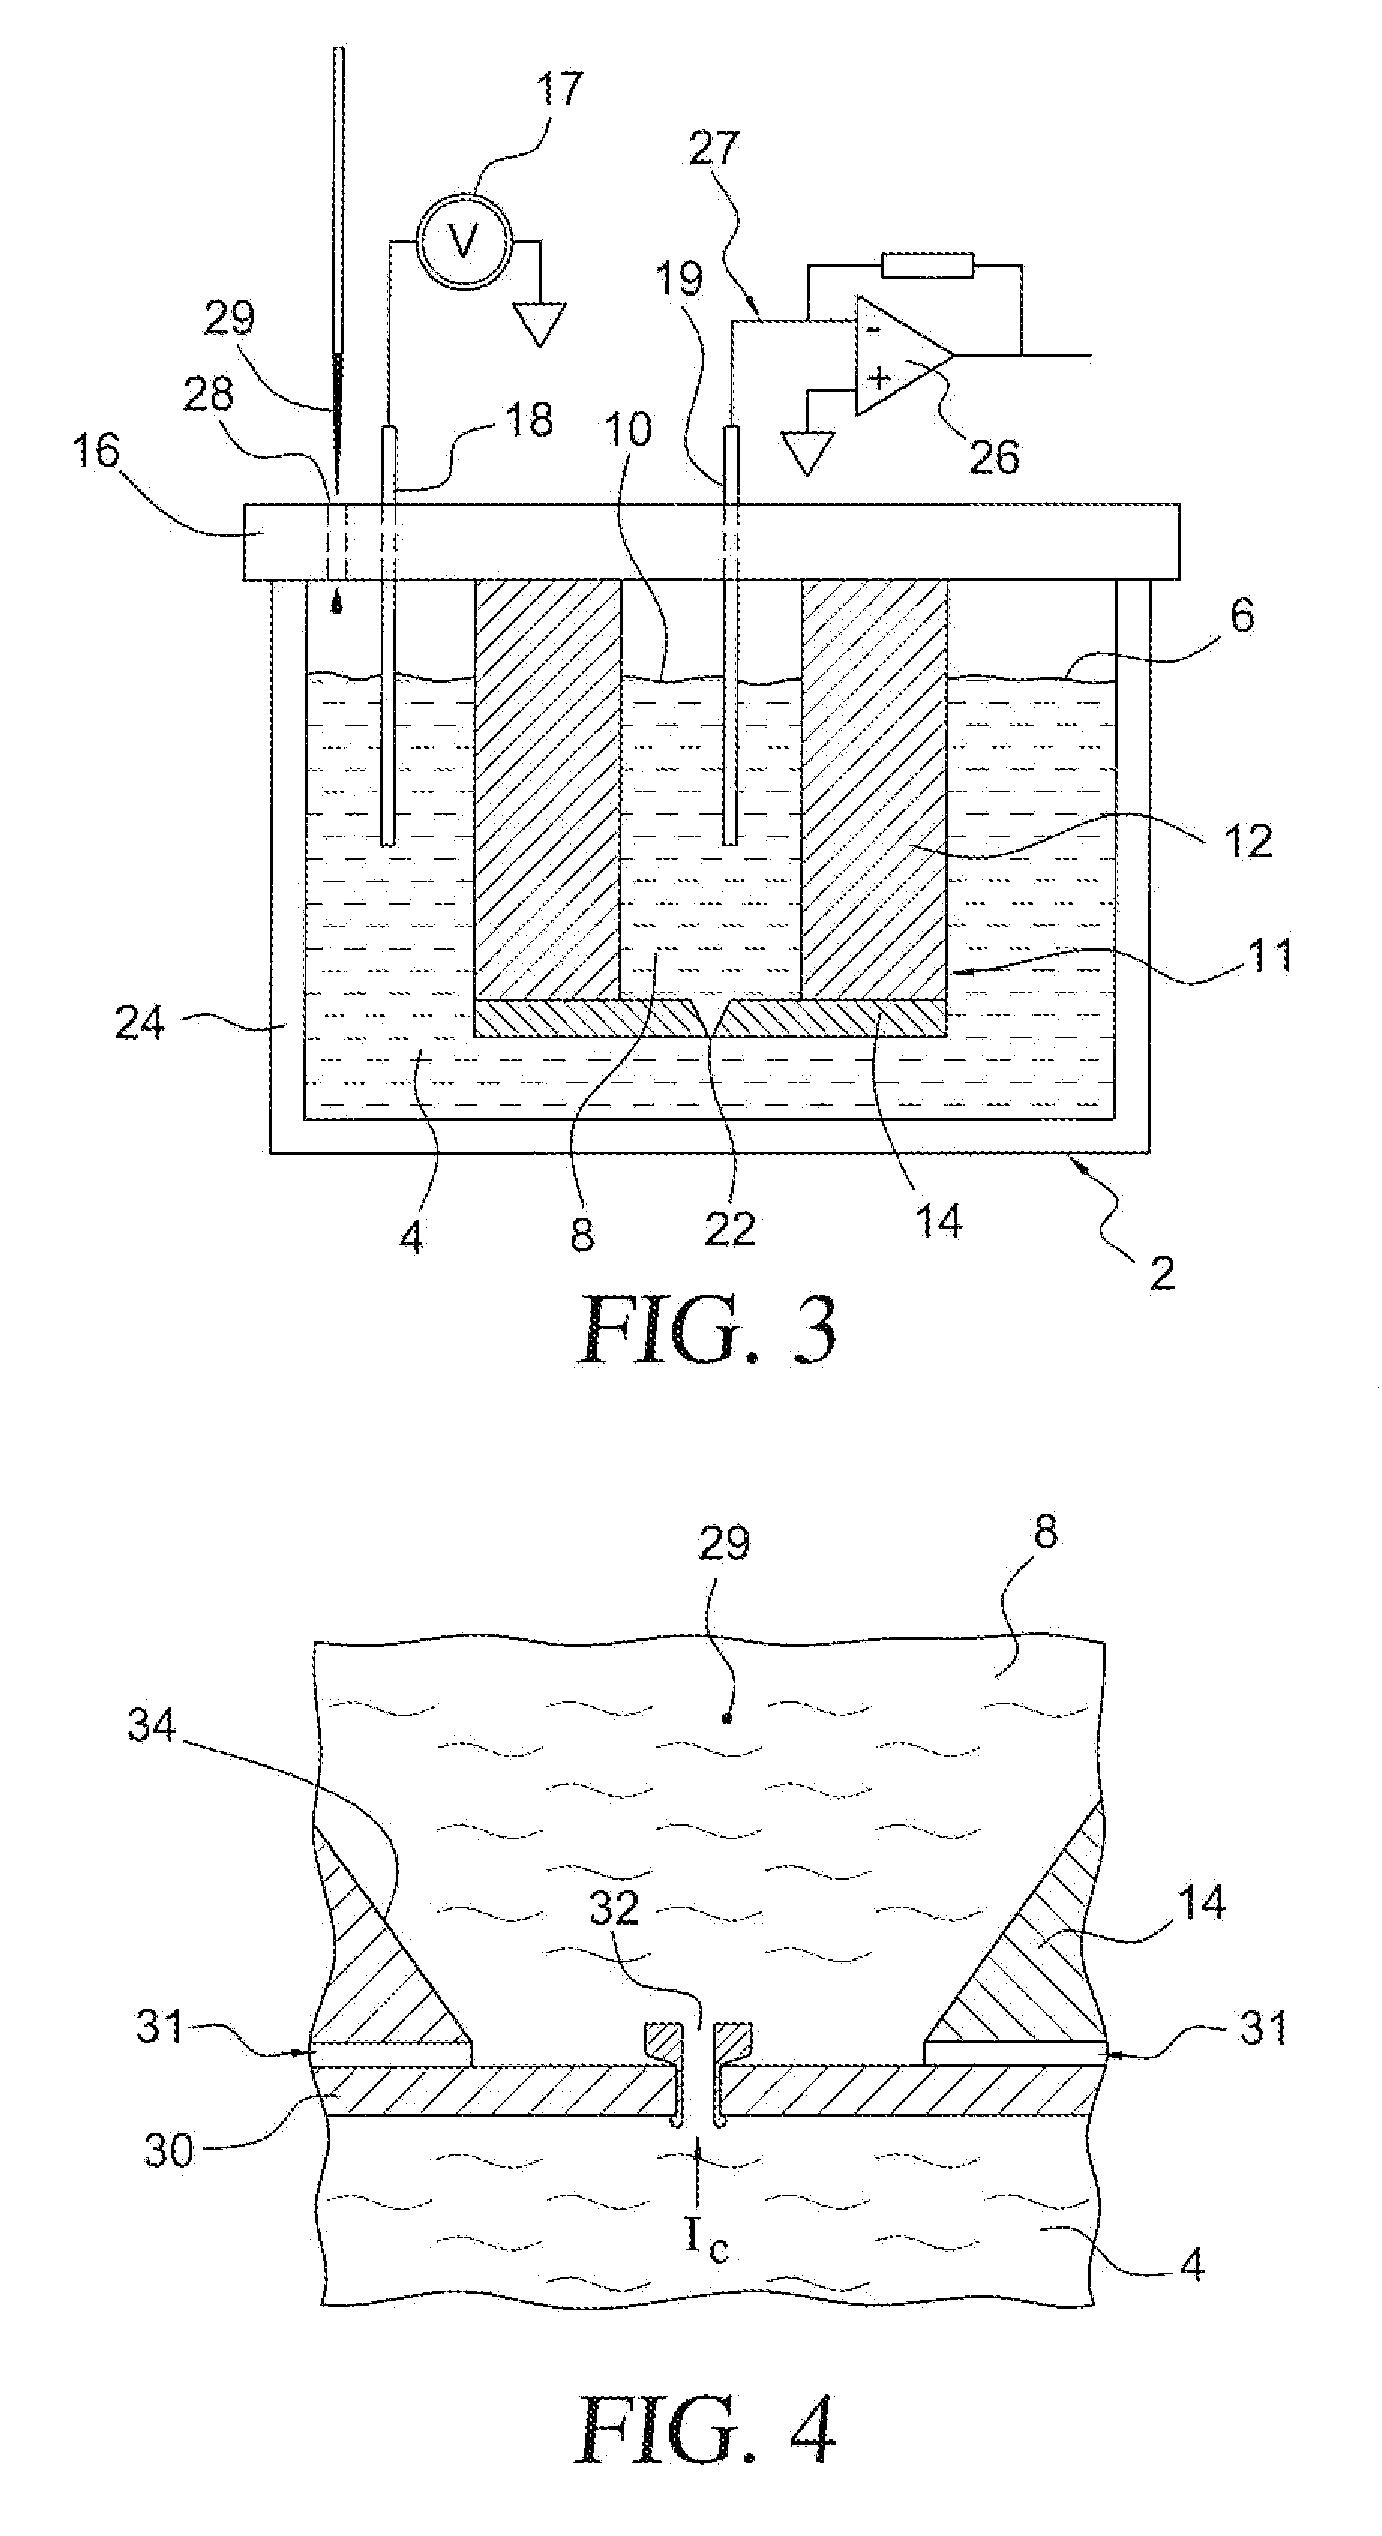 Apparatus and Method for Sensing a Time Varying Ionic Current in an Electrolytic System